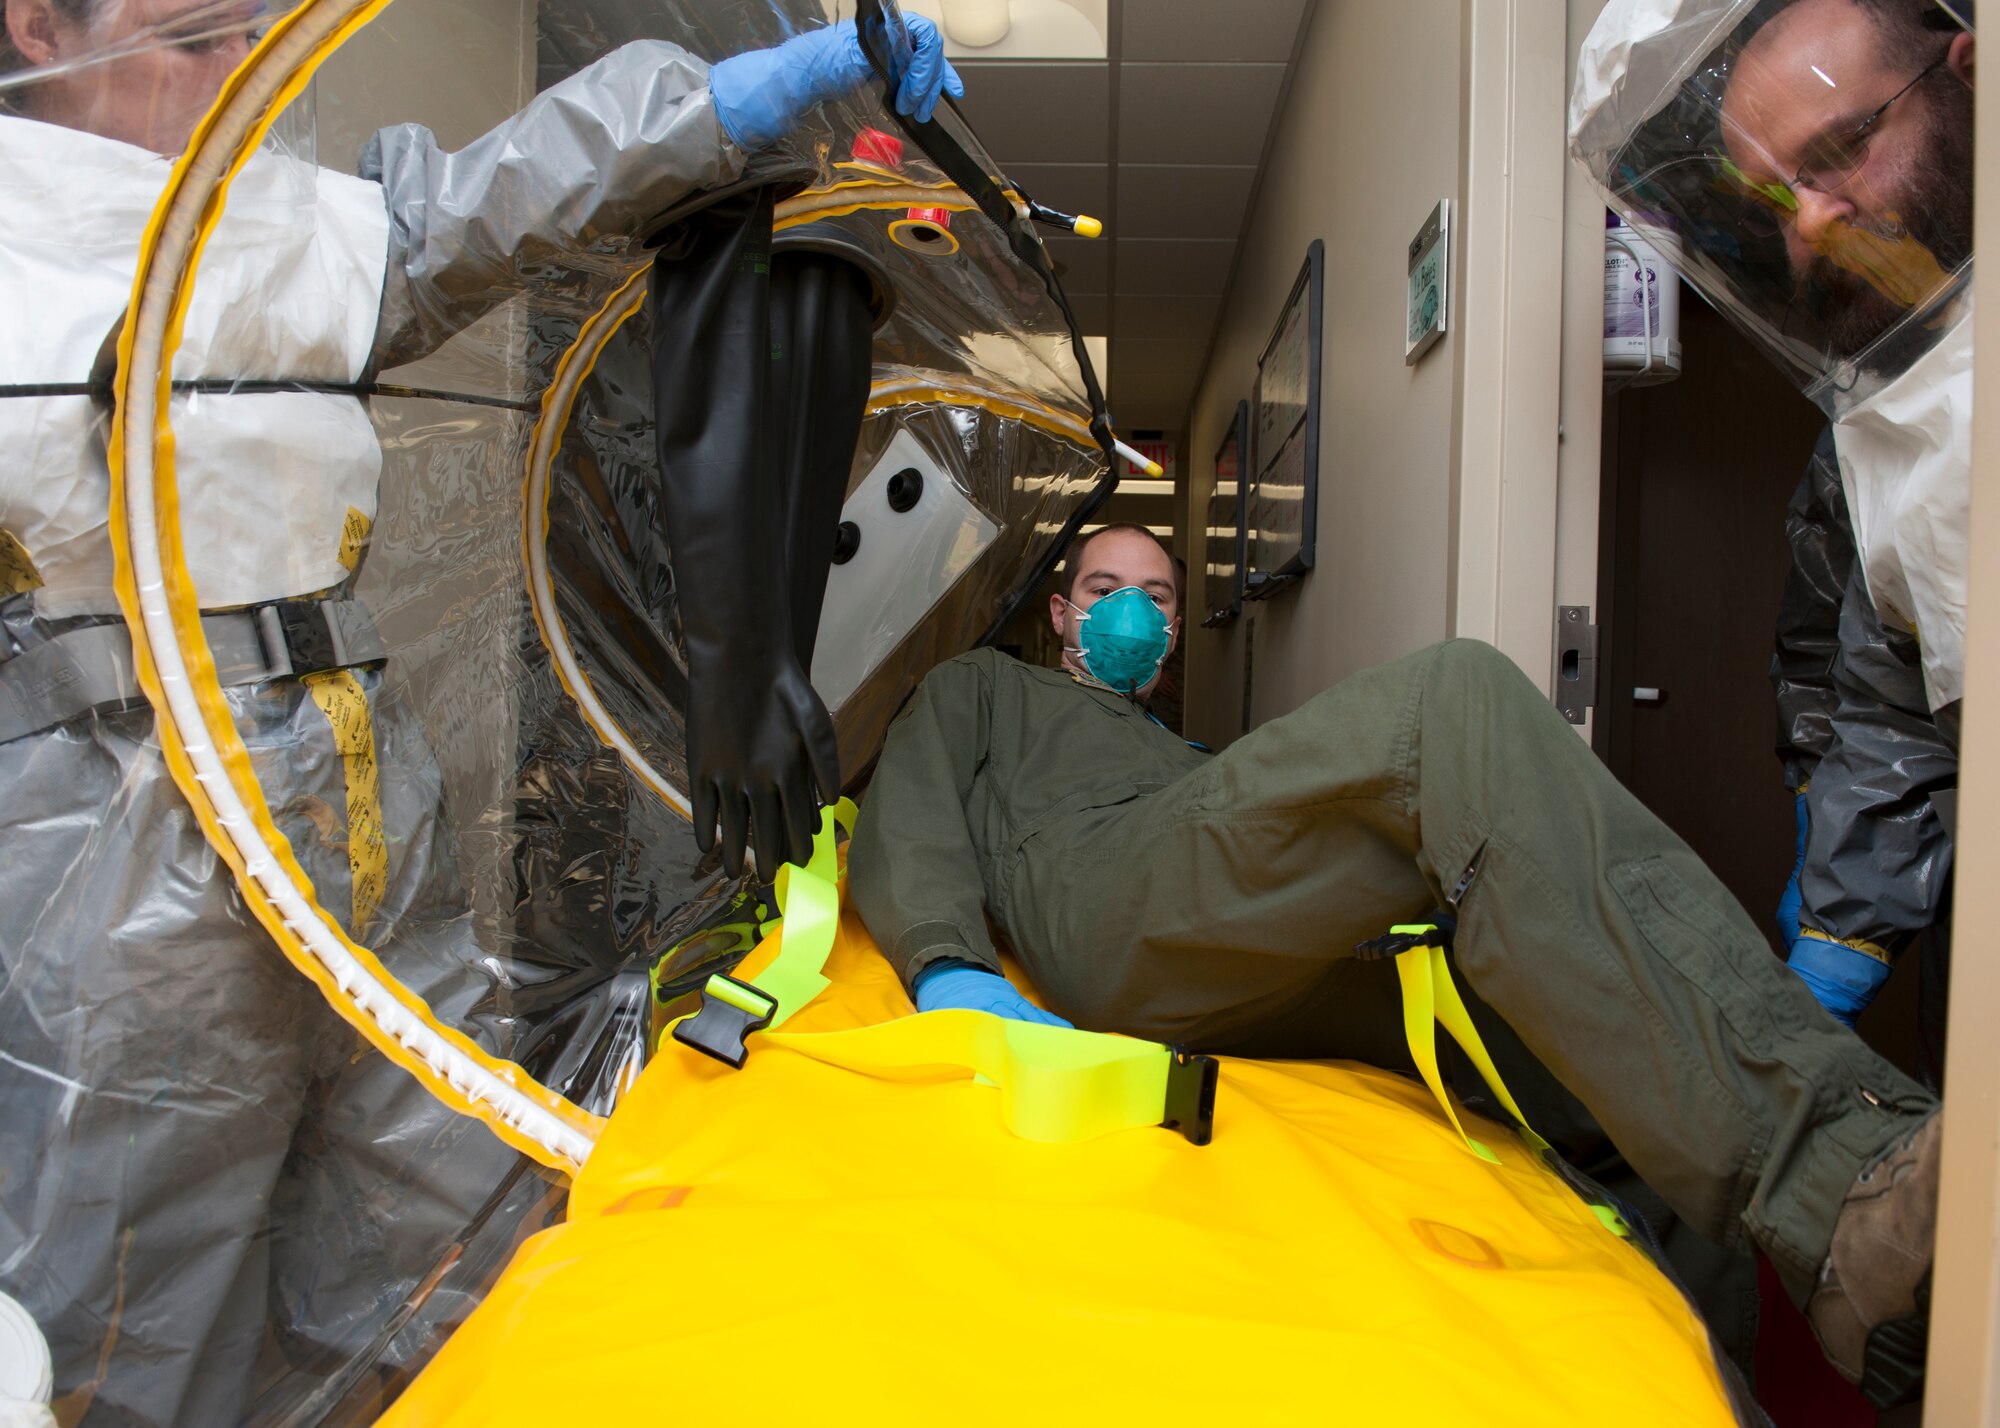 Brett Zingarelli and Brittany Farra, St. Francis Healthcare emergency medical technicians, assist Senior Airman Peter Cannizzaro, 9th Airlift Squadron loadmaster, into a single patient bio-containment unit (isolation pod) Nov. 3, 2015, in the 436th Medical Group Clinic on Dover Air Force Base, Del. The isolation pod’s purpose is to isolate a patient from other individuals to prevent the spread of disease. (U.S. Air Force photo/Senior Airman Zachary Cacicia)